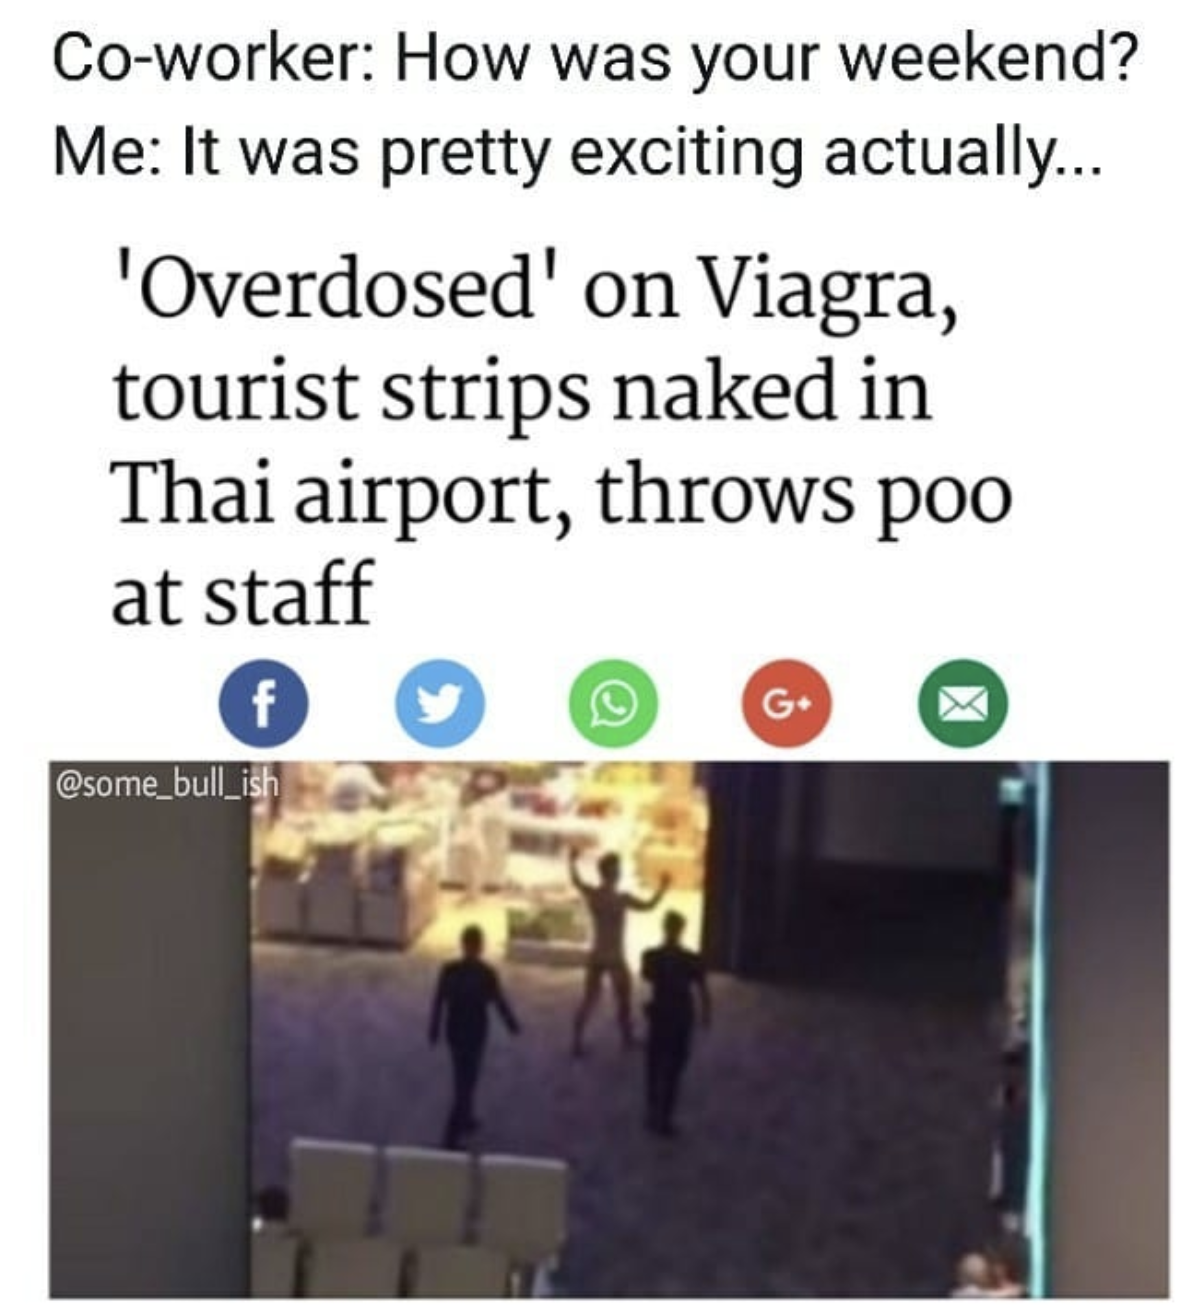 florida news stories - Coworker How was your weekend? Me It was pretty exciting actually... 'Overdosed' on Viagra, tourist strips naked in Thai airport, throws poo at staff